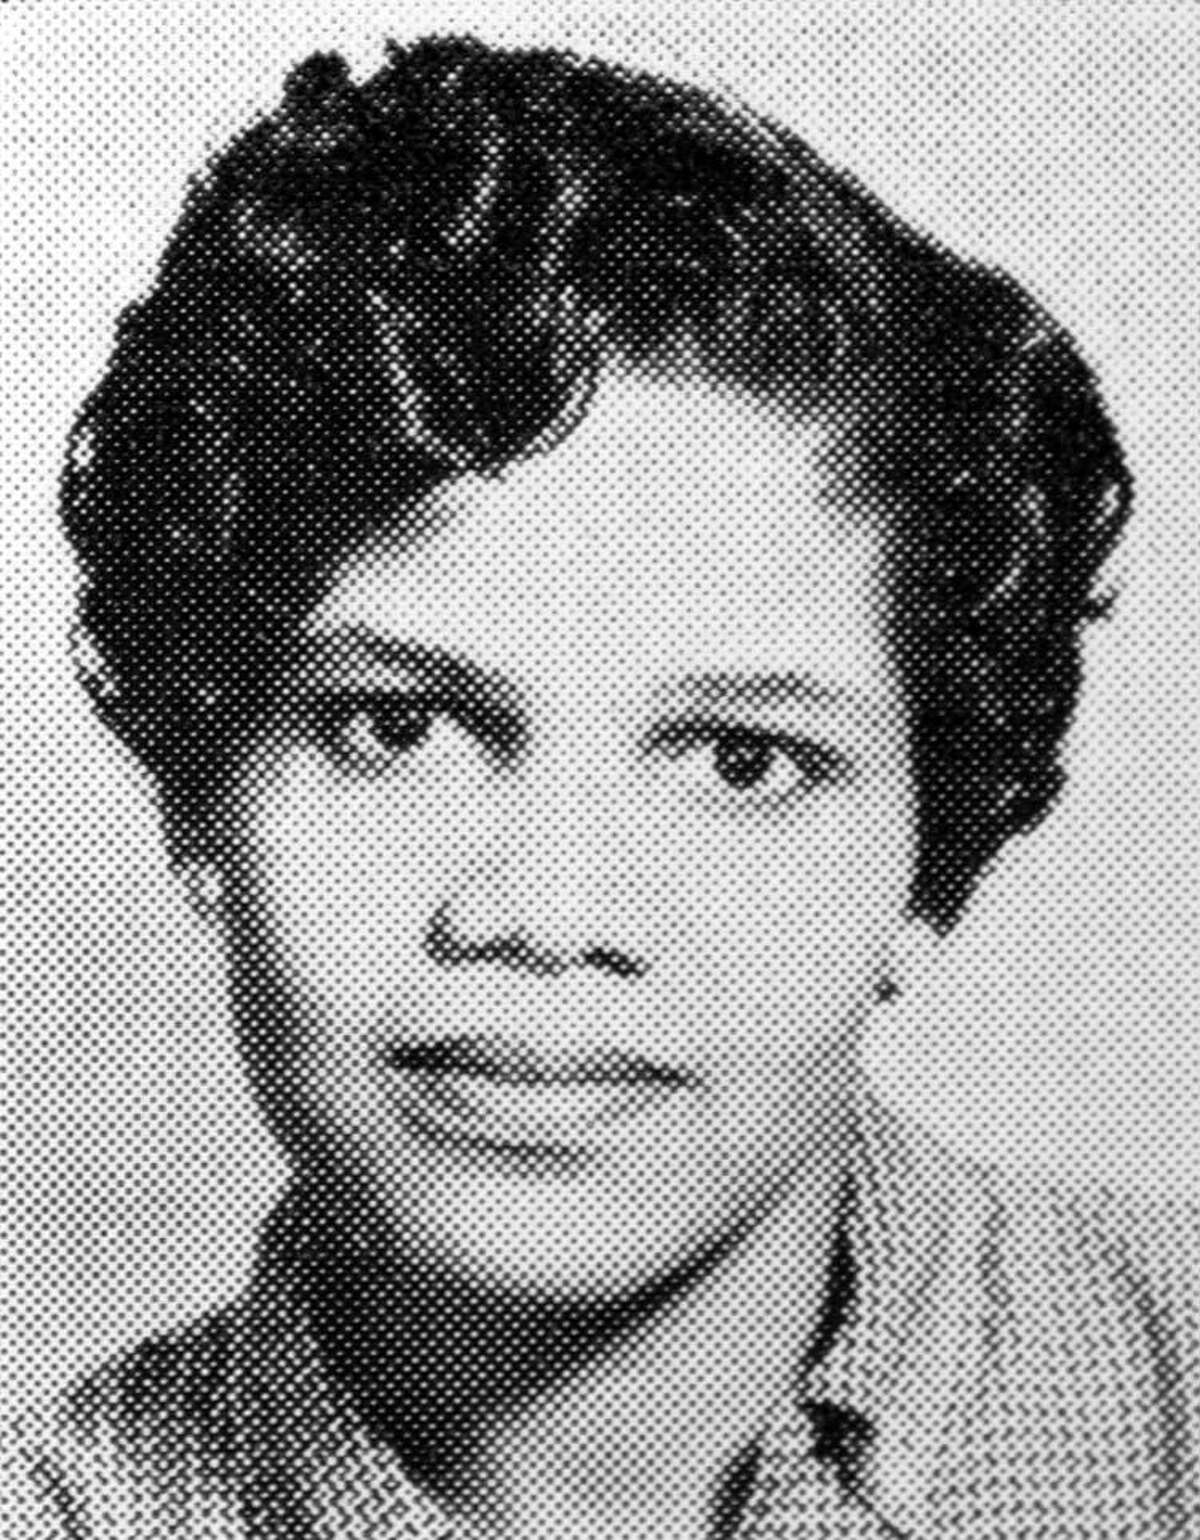 Dr. Edith Irby Jones, the first black intern at Baylor College of Medicine and later a prominent community advocate, died in Houston on Monday, July 15, 2019. This photo from Baylor is circa 1973.